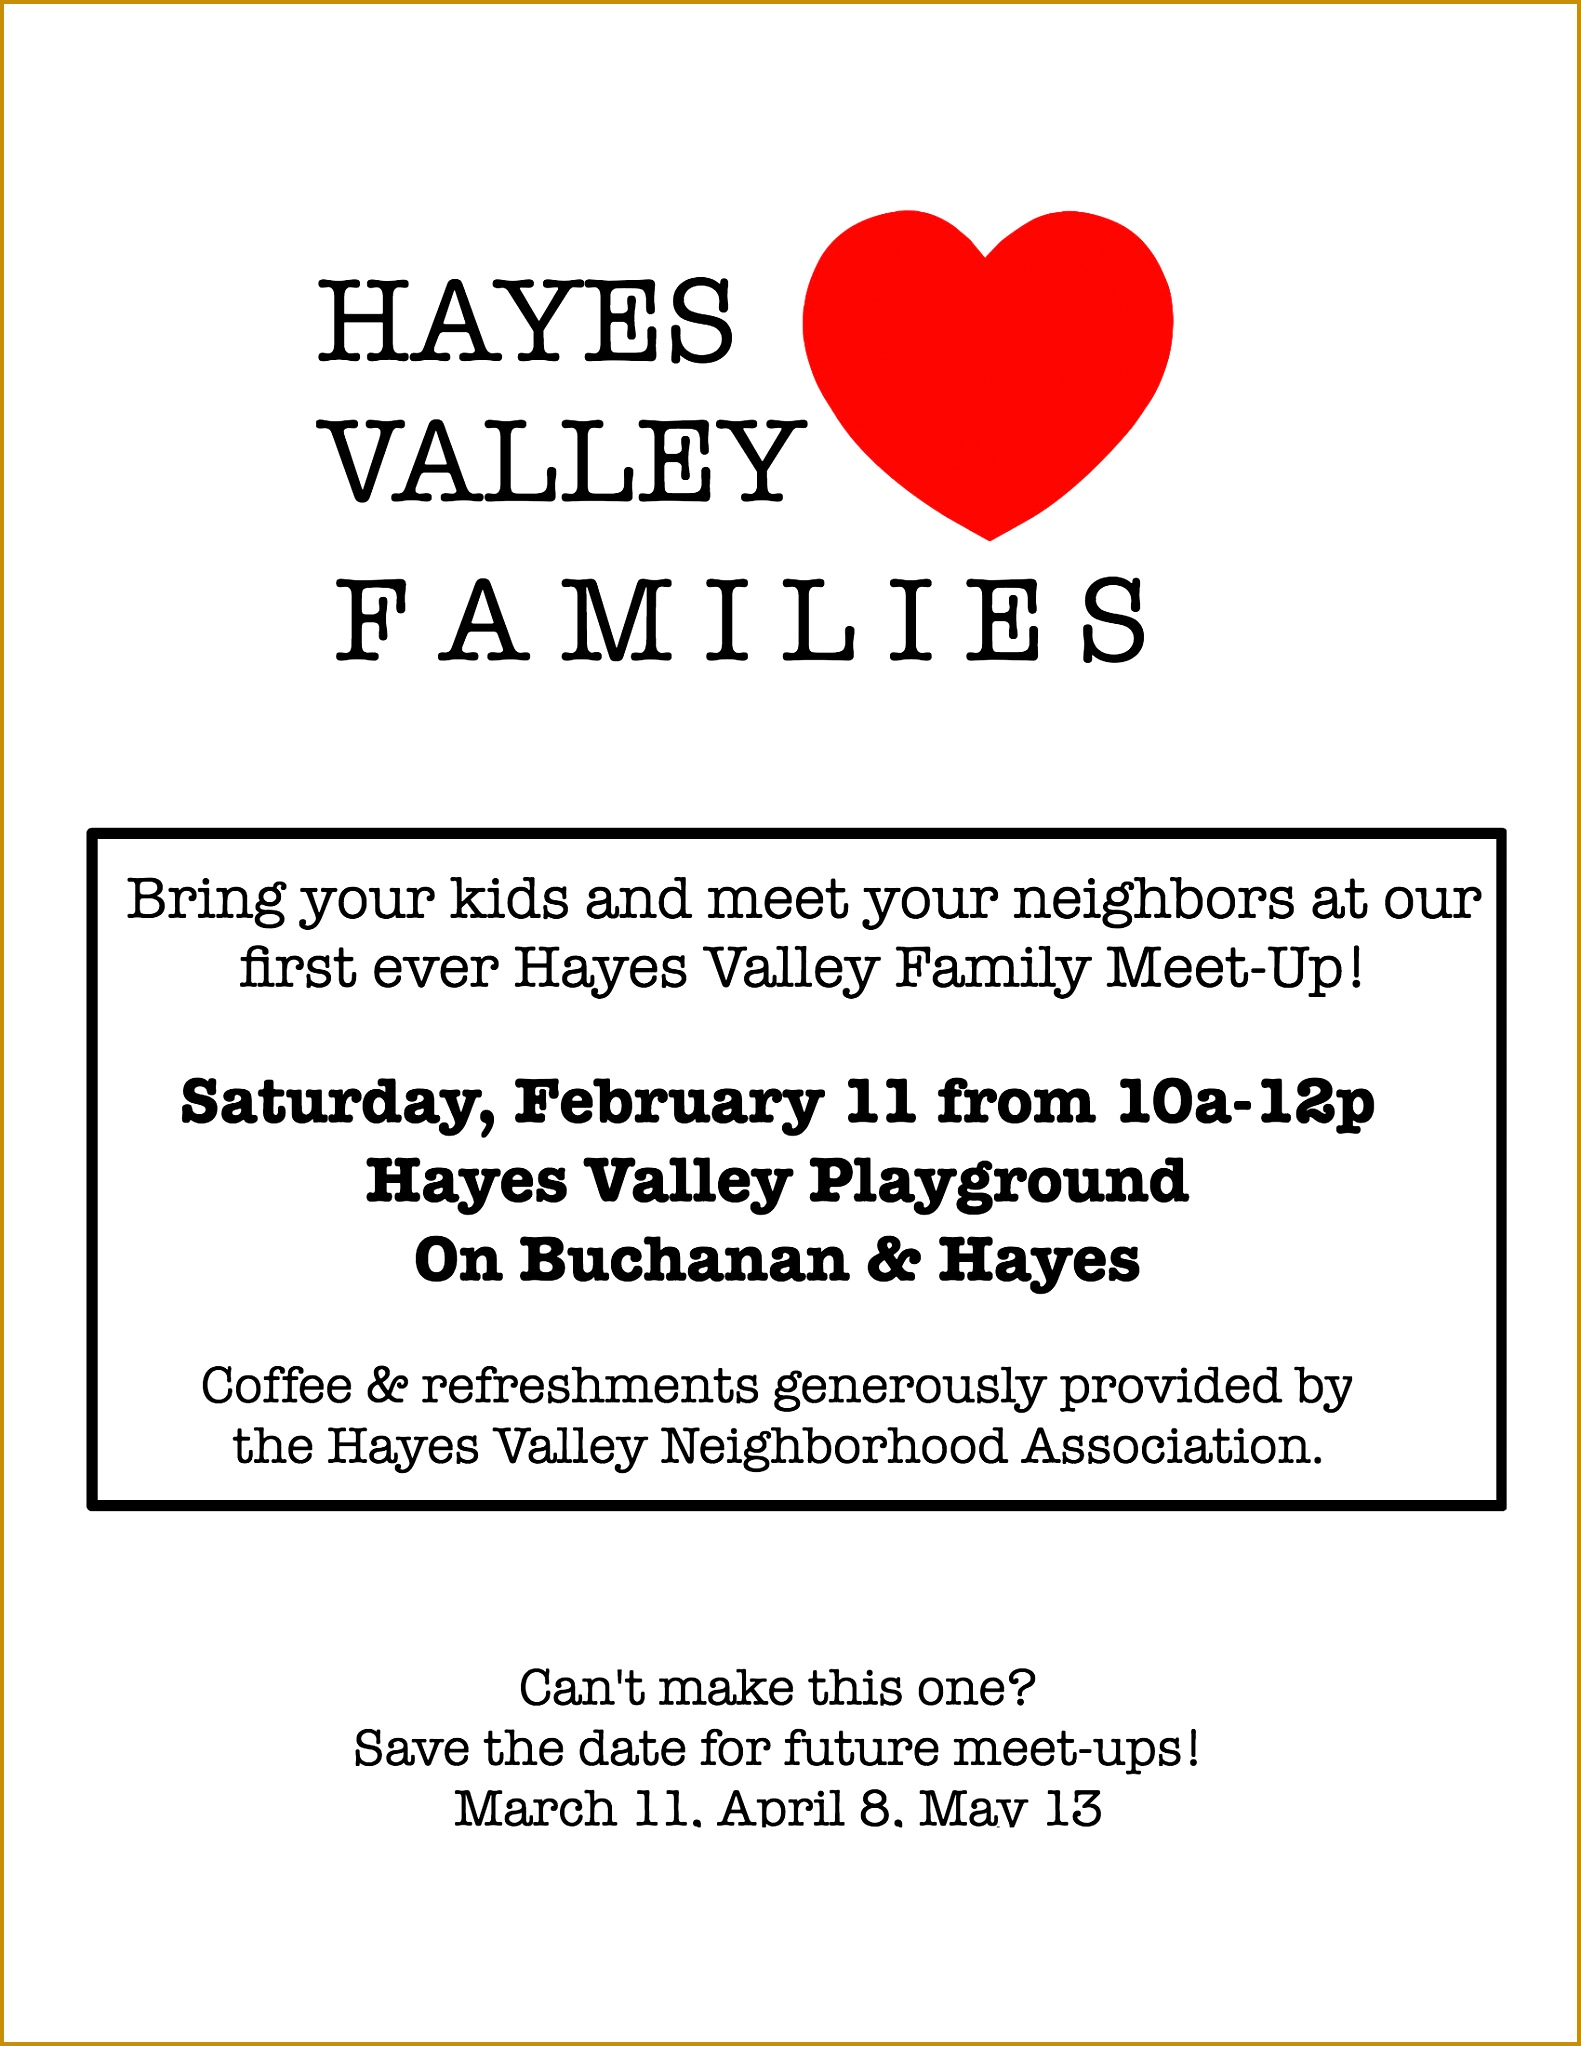 Hayes Valley Families Quarterpage Flyer Template 20461581